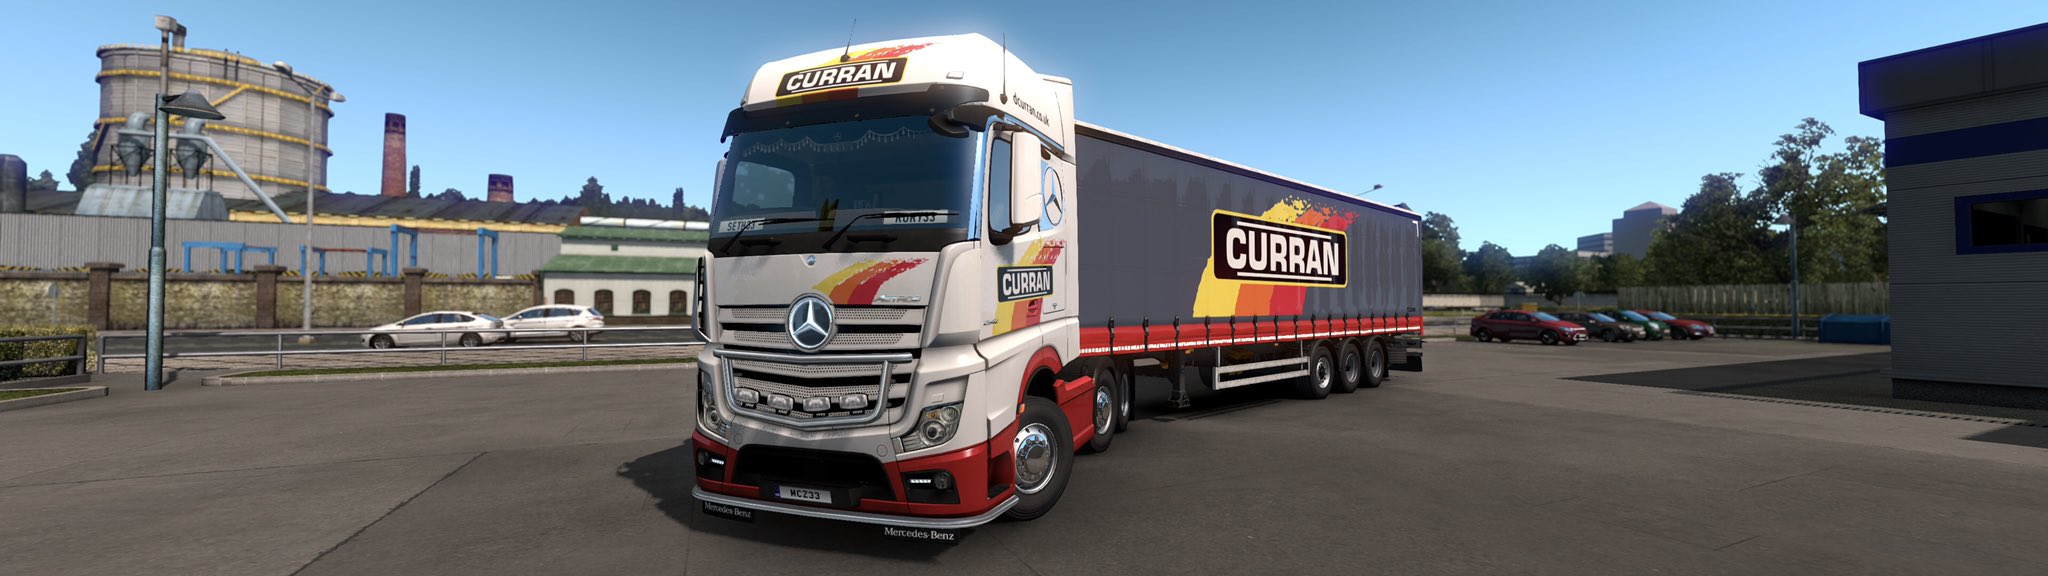 Scs Software We Love Seeing Drivers Get Creative With Their Paint Jobs In Ets2 Amp Ats This Fine Looking Livery Is A Recreation Of The Curransofbangor Company Based In